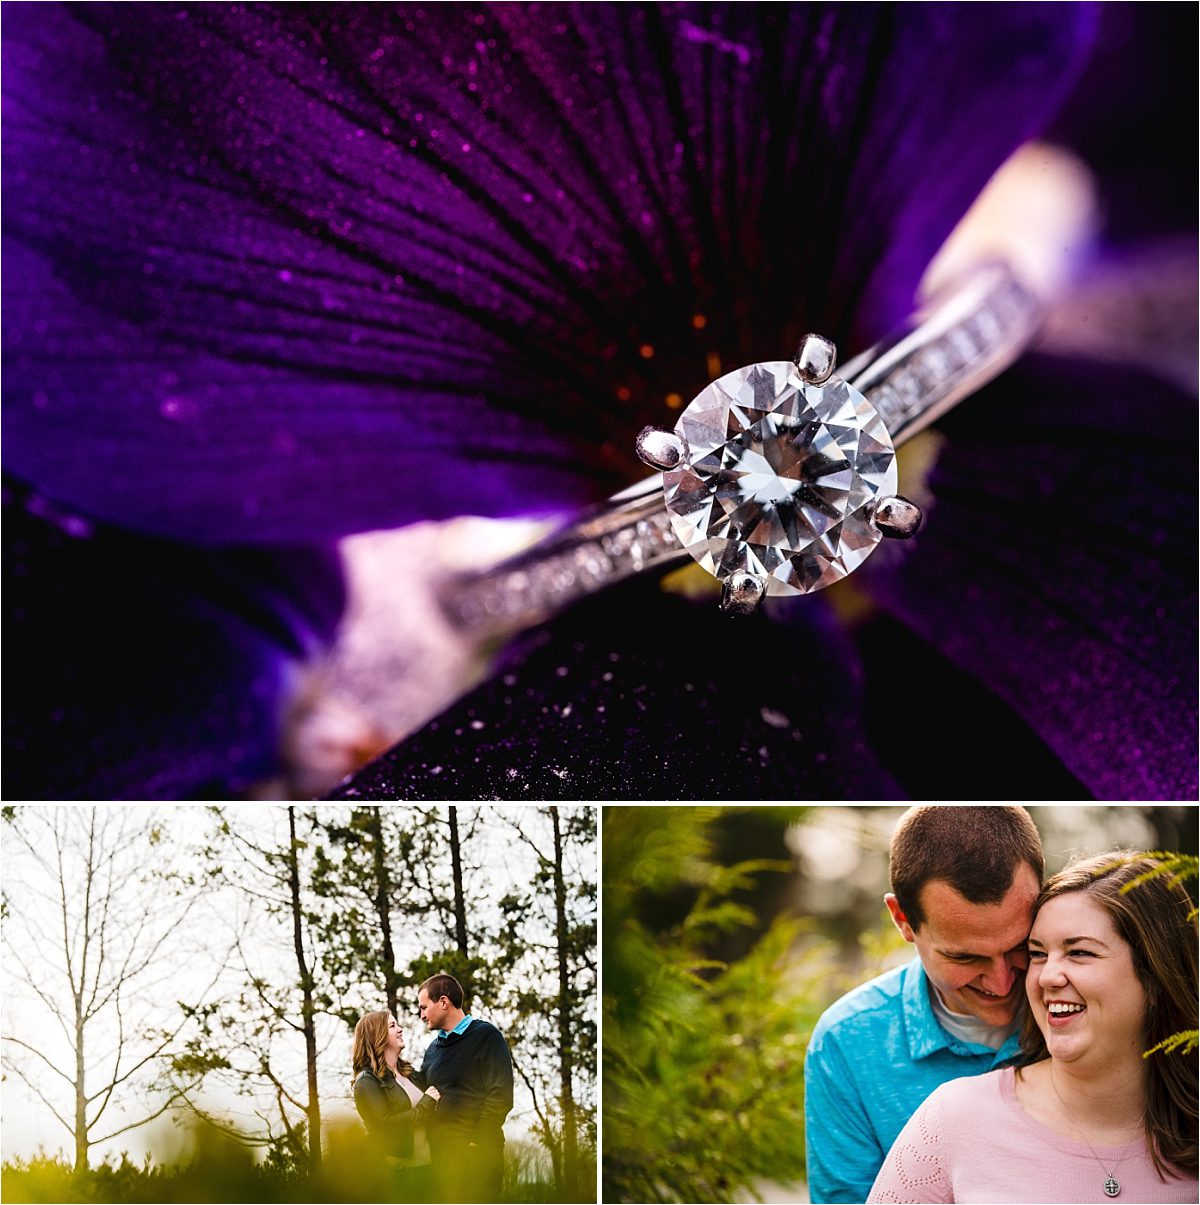 Engagement pictures done in Carmel, Indiana at Coxhall Gardens